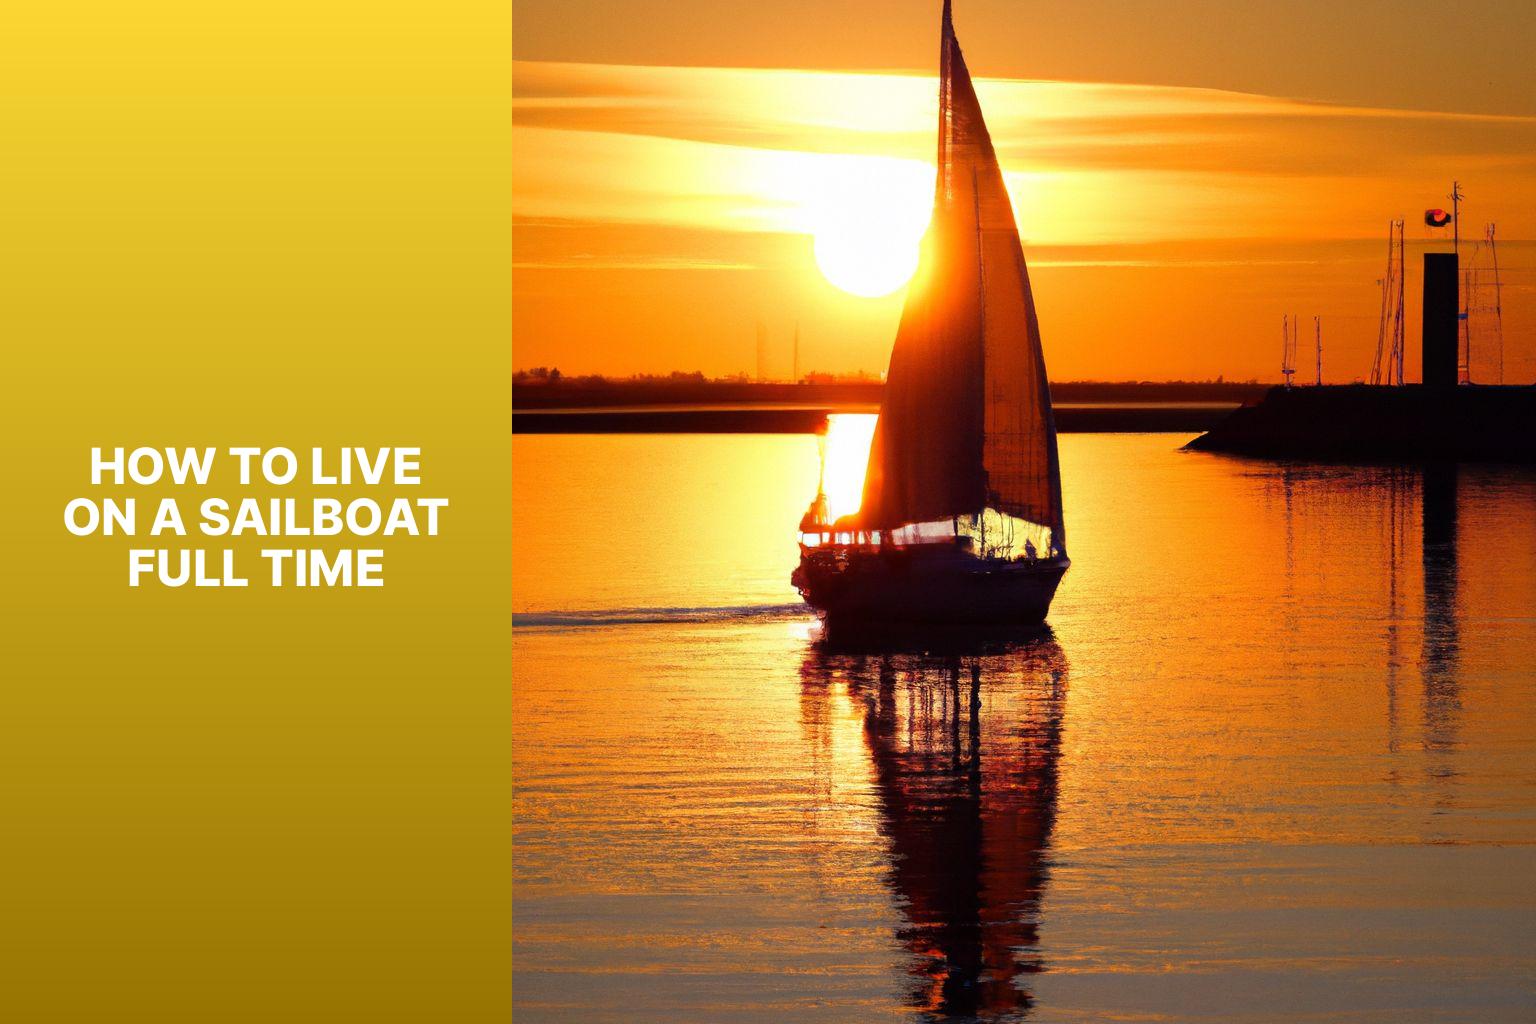 Achieving Full Time Sailboat Living: Expert Tips for a Dreamy, Nomadic Lifestyle